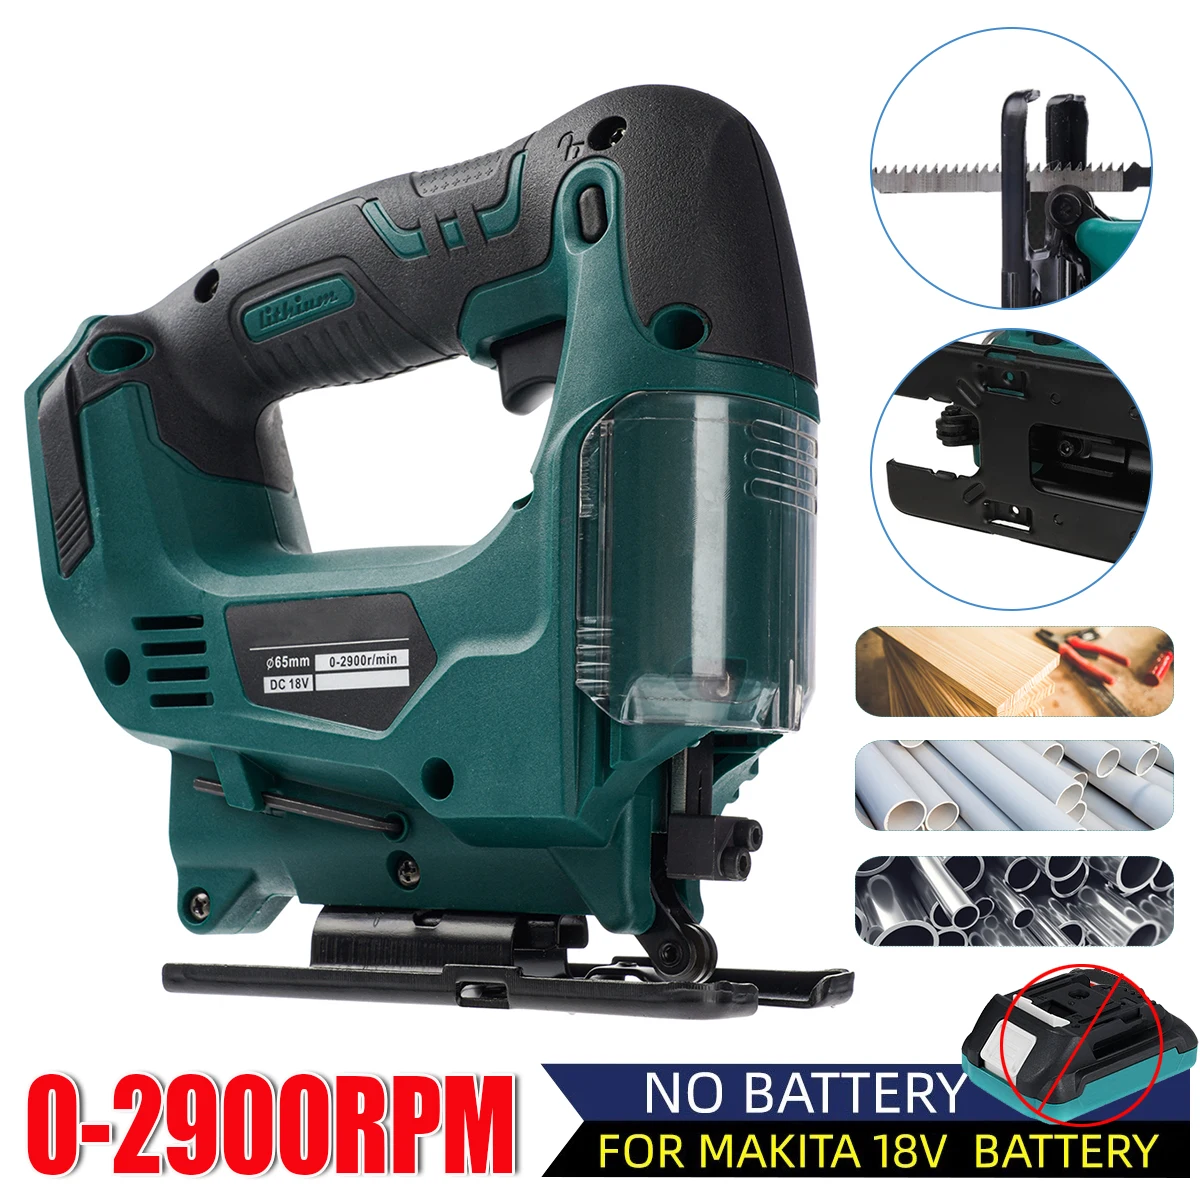 21V 65mm 2900RPM Cordless Jigsaw Electric Jig Saw Portable Multi-Function Woodworking Power Tool for Makita 18V Battery 65mm 2900rpm cordless jigsaw with quick blade change electric power tool jigsaw woodworking power for makita 18v battery